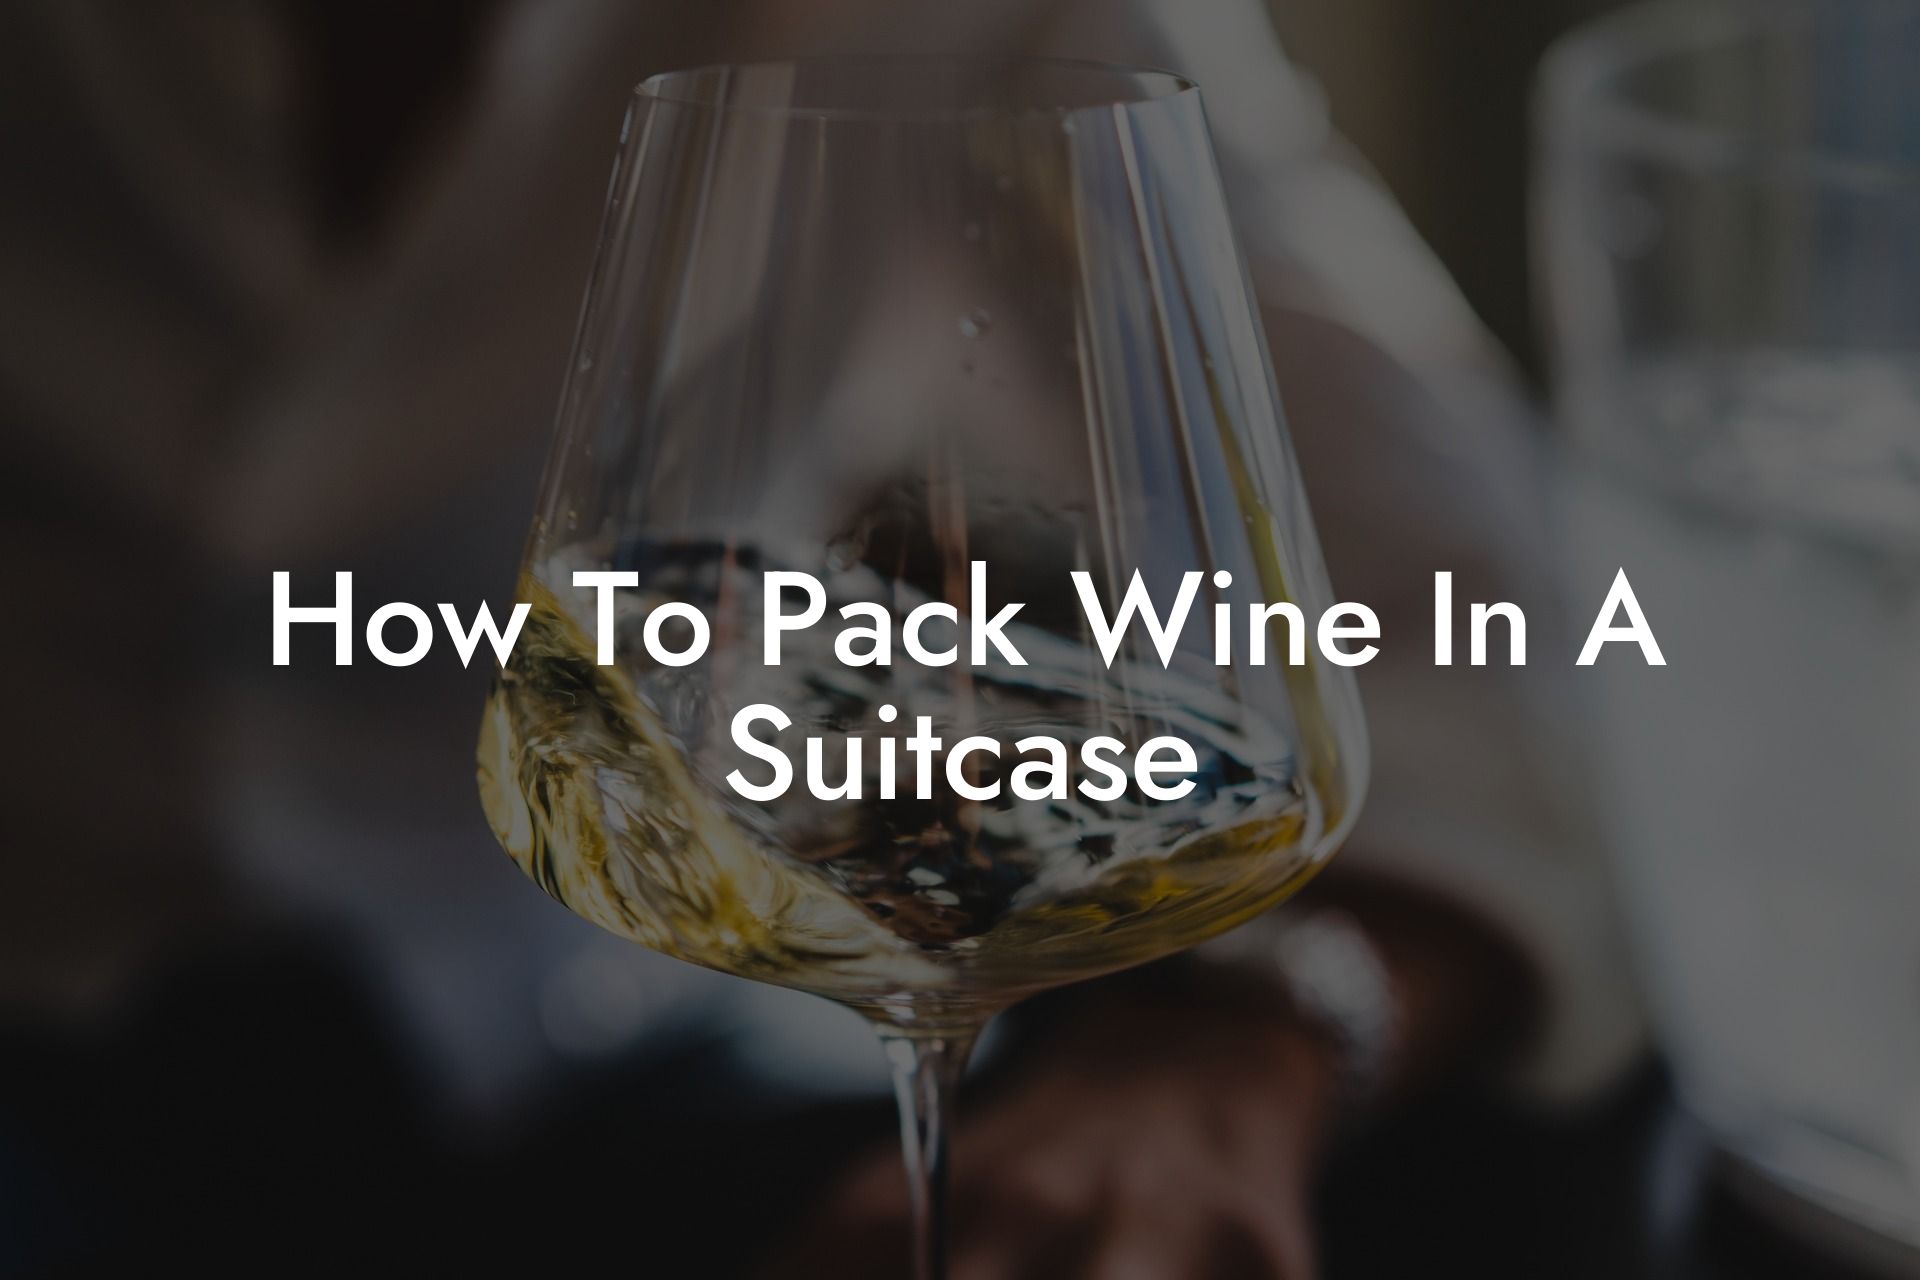 How To Pack Wine In A Suitcase